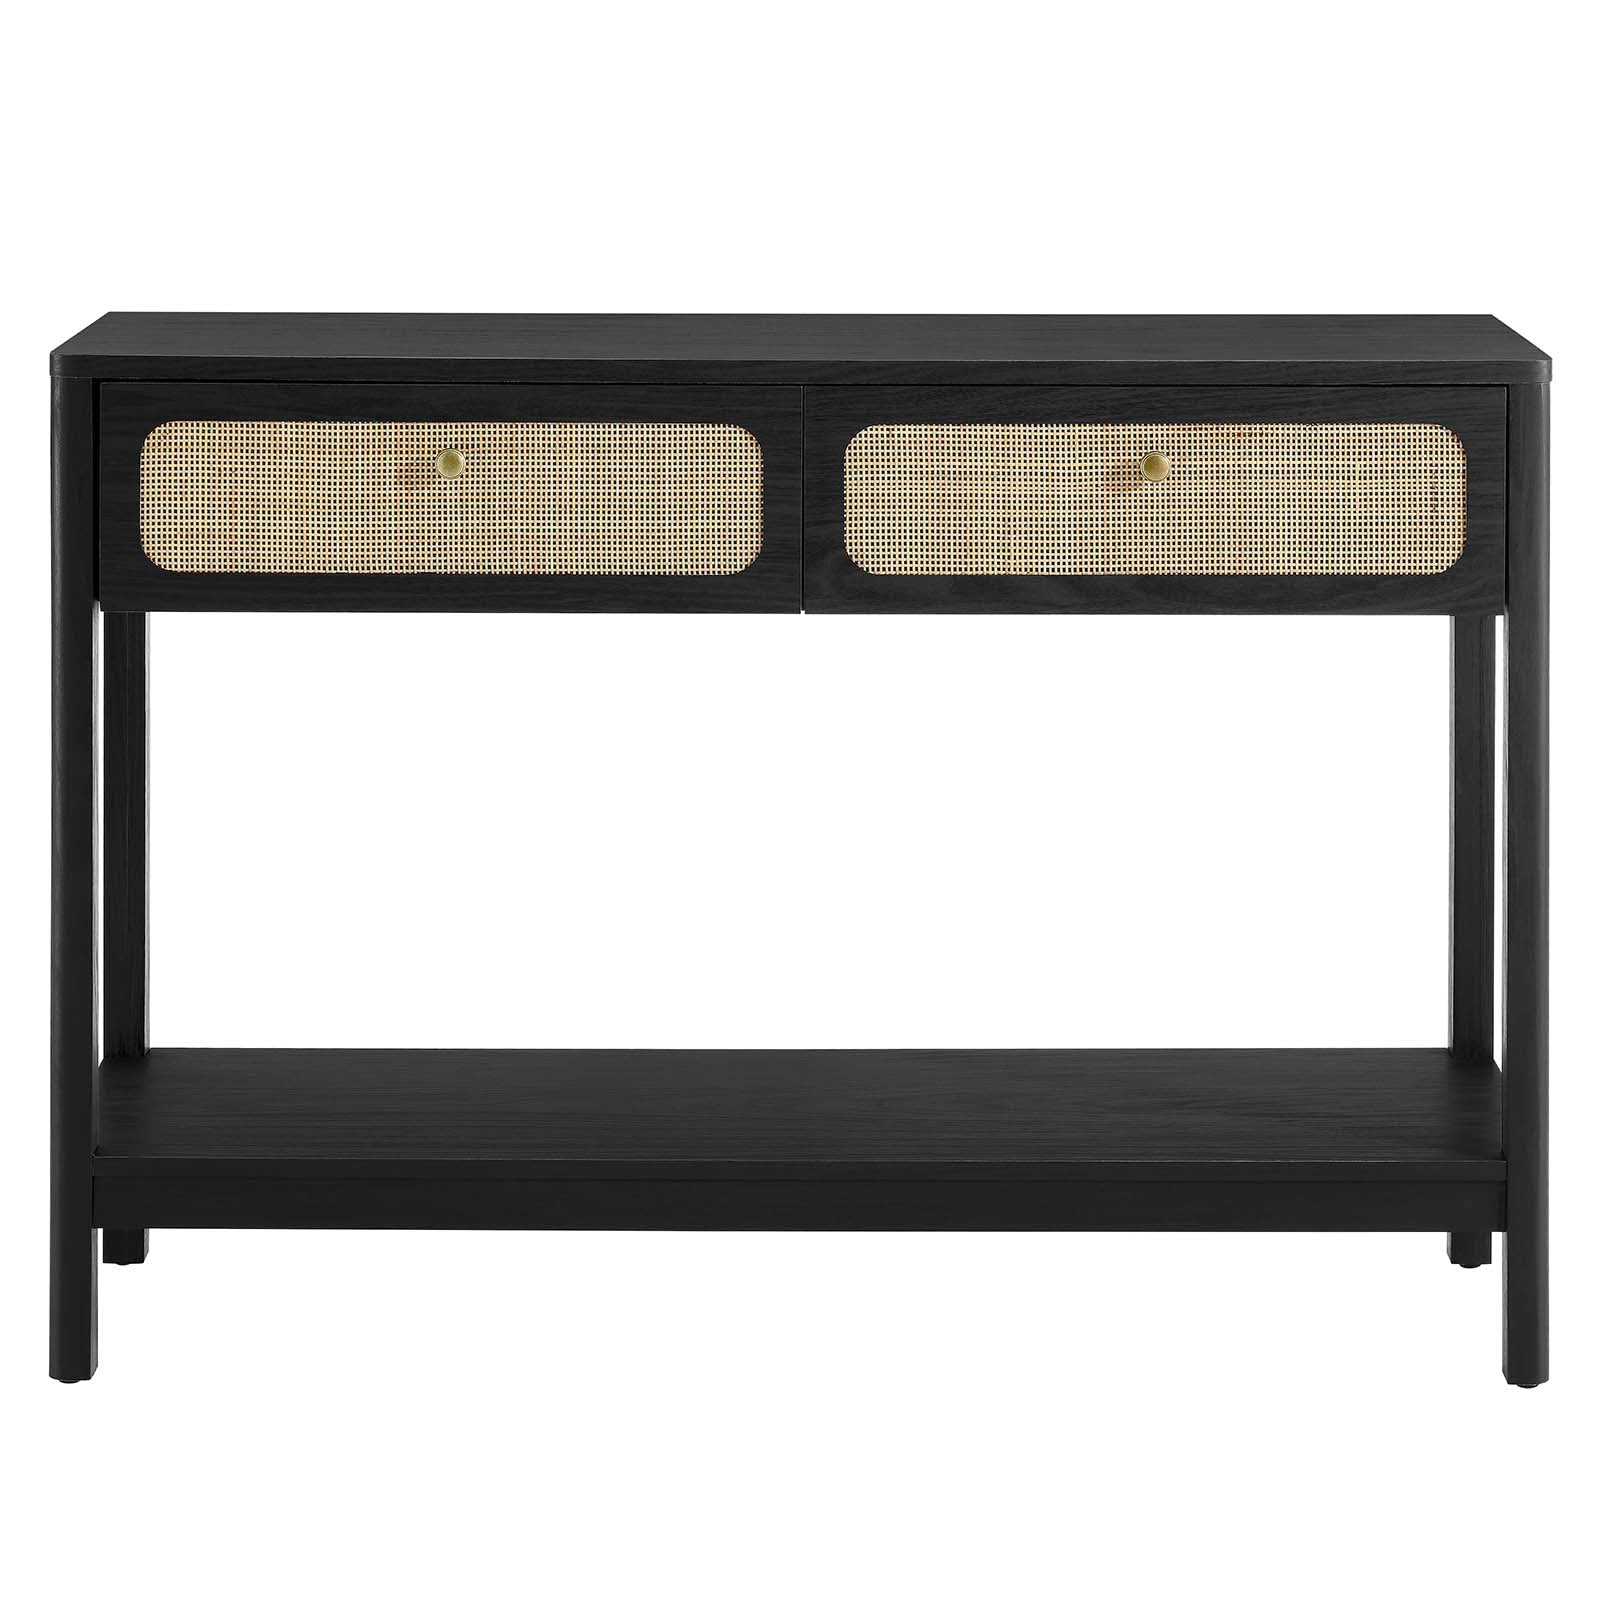 Chaucer Wood Entryway Console Table - East Shore Modern Home Furnishings